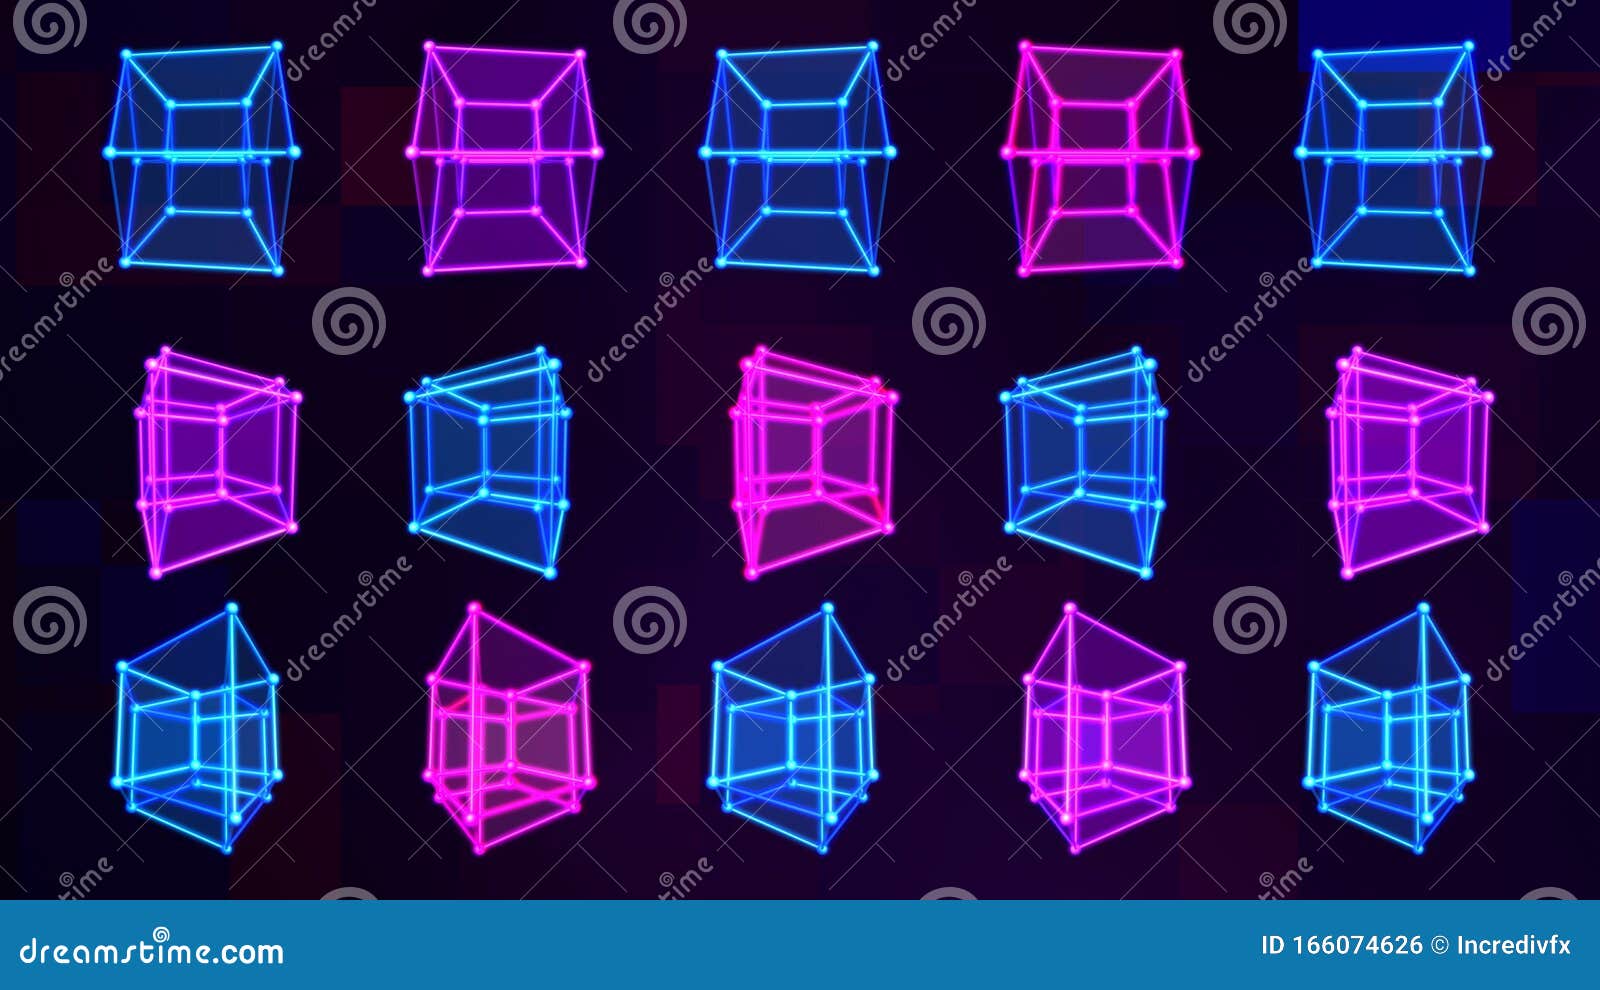 4D Hypercube Tesseract Array Matrix with Trippy Visual Neon Colors -  Abstract Background Texture Stock Illustration - Illustration of  psychedelic, purple: 166074626